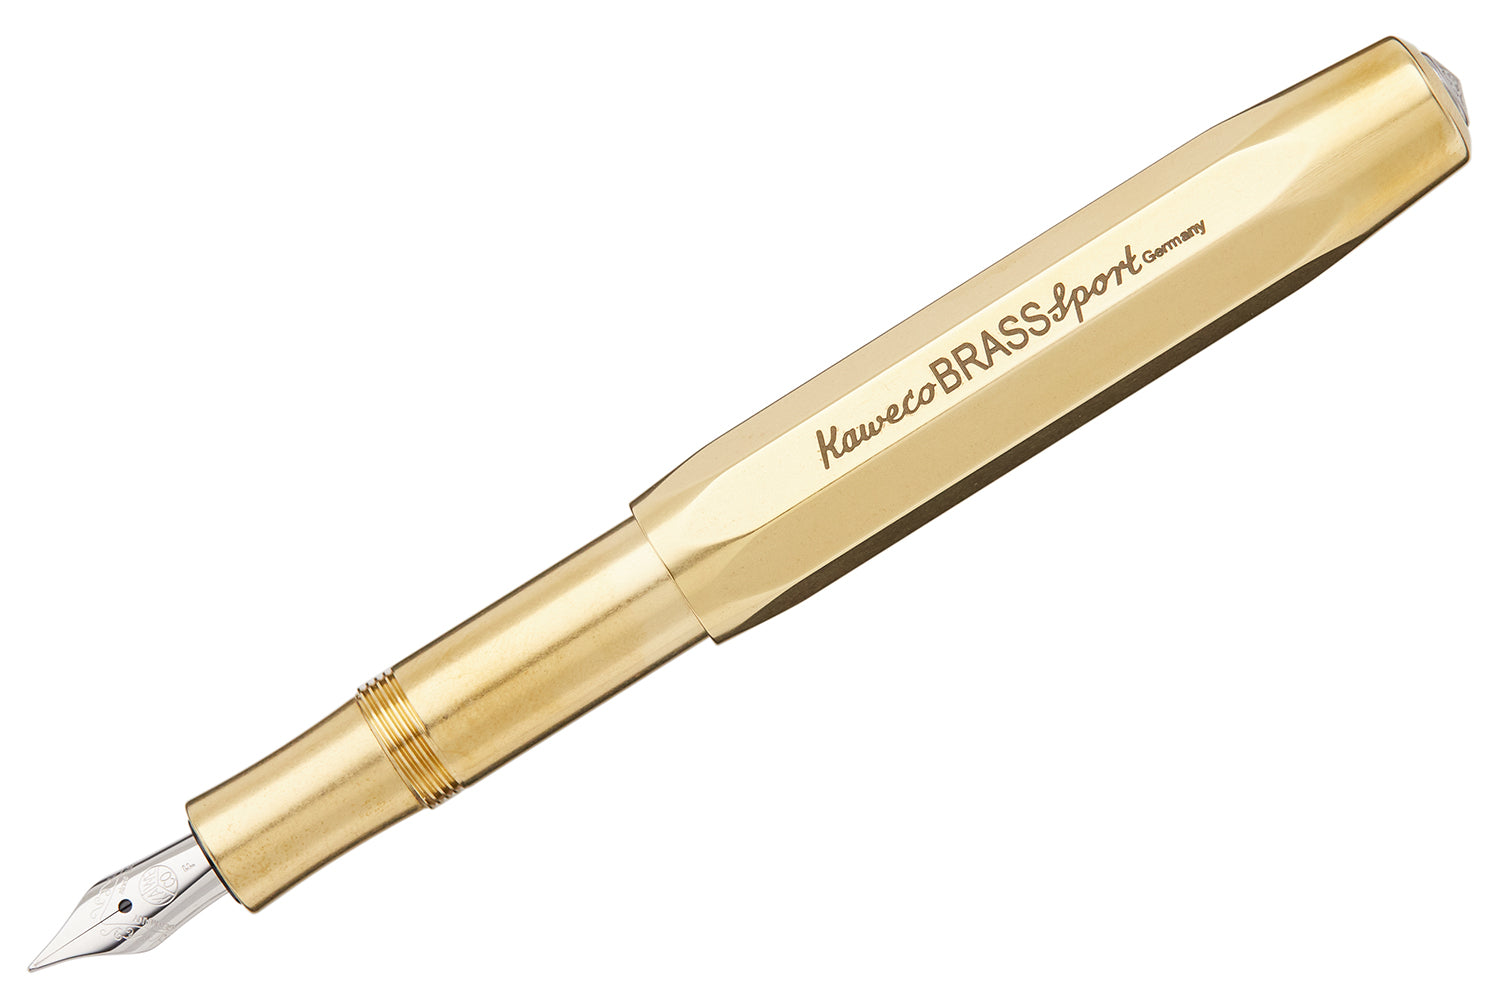 NPDish. Kaweco Brass Sport with ornate clip. Gift from my